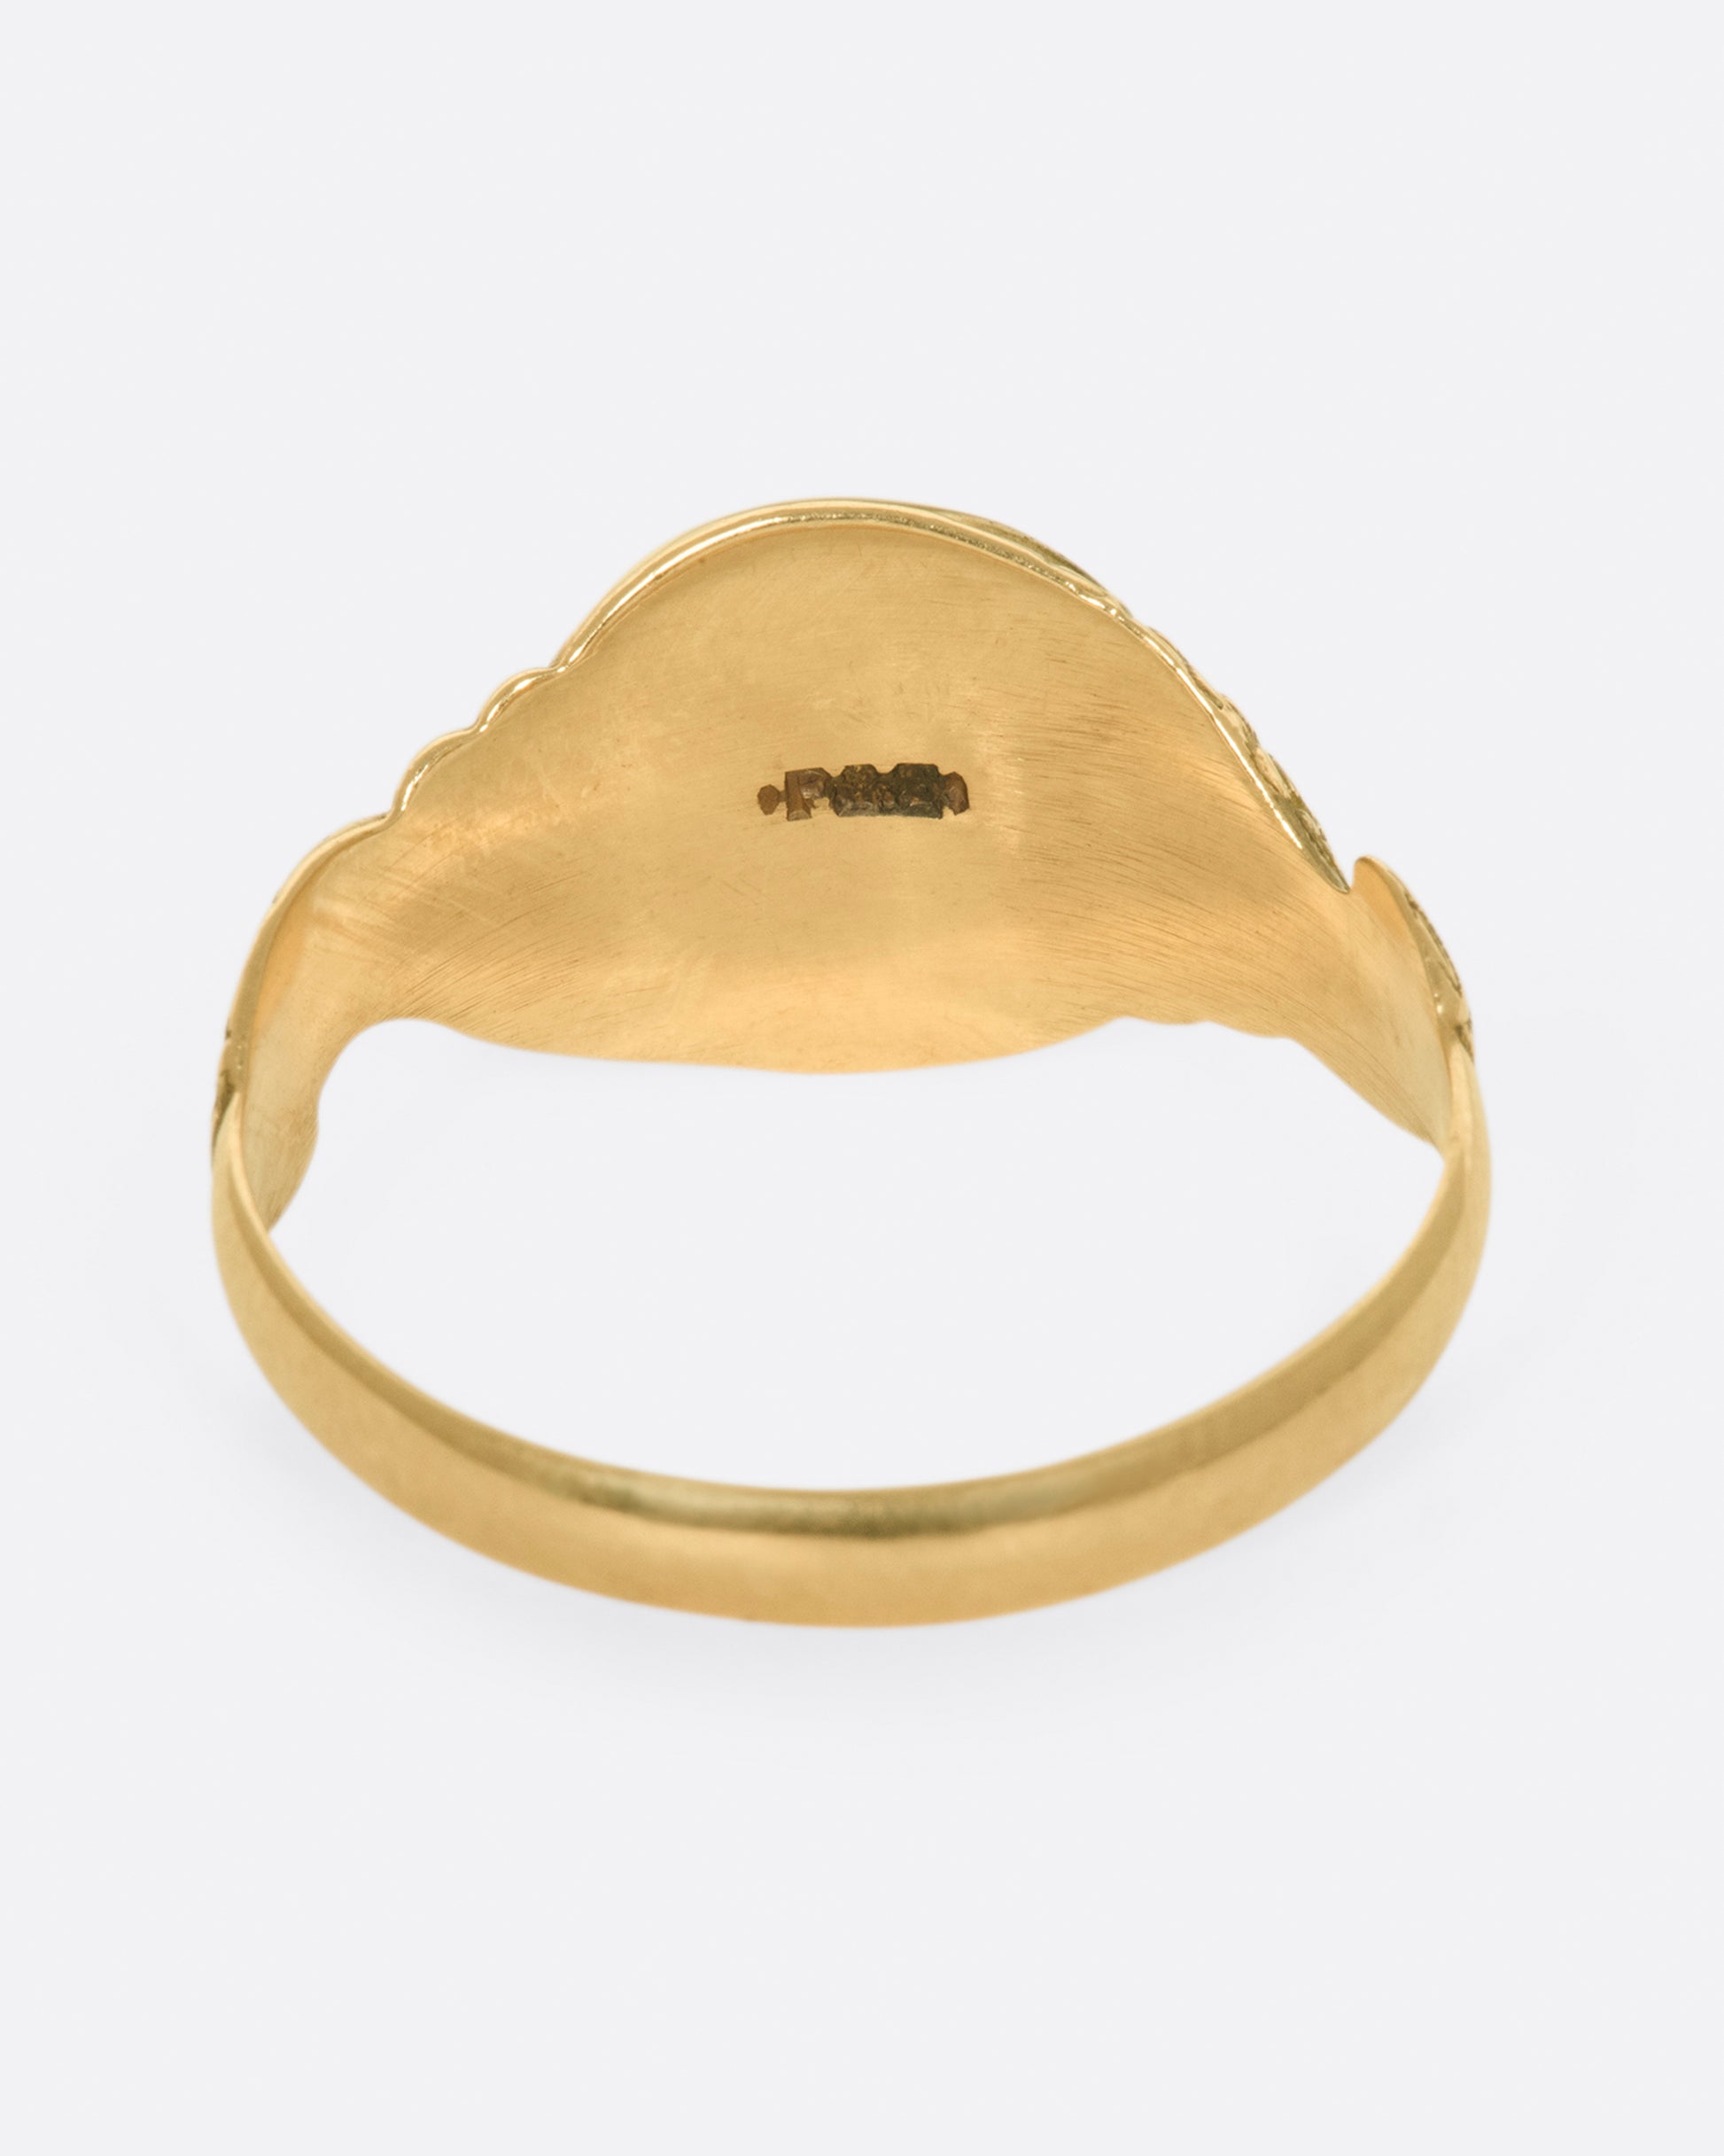 A classic, blank signet ring with carved snakes swirling around the band.